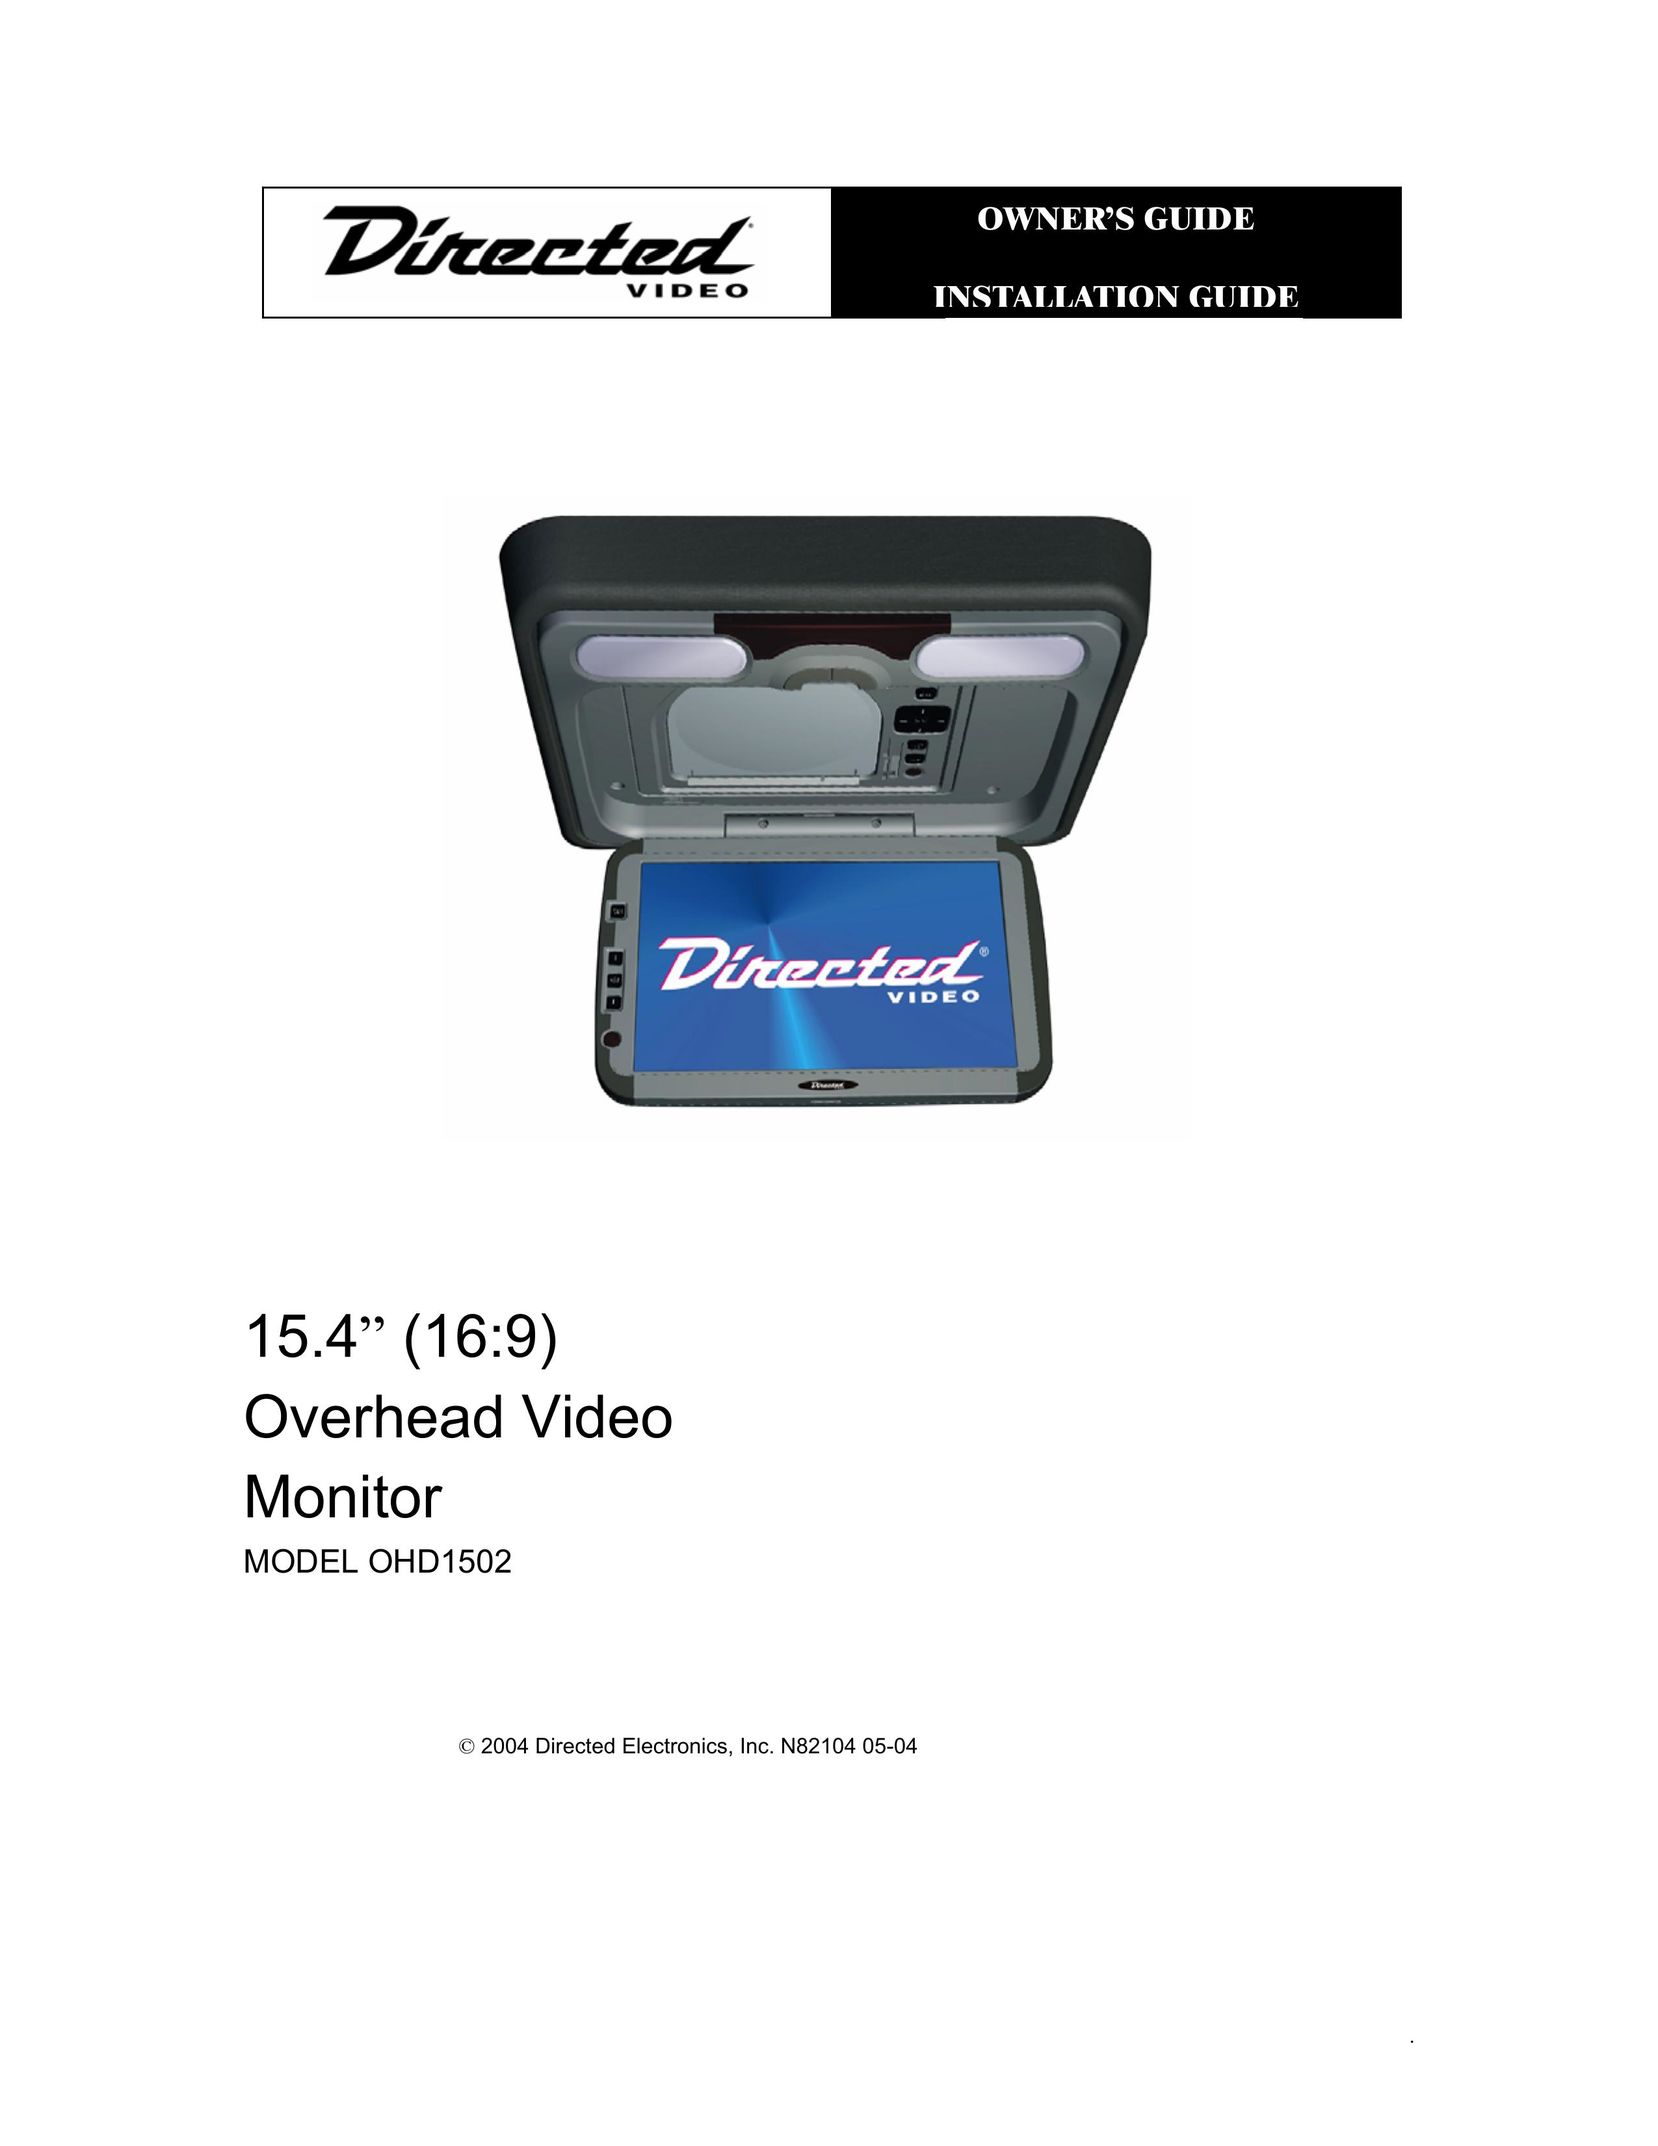 Directed Electronics OHD1502 Computer Monitor User Manual